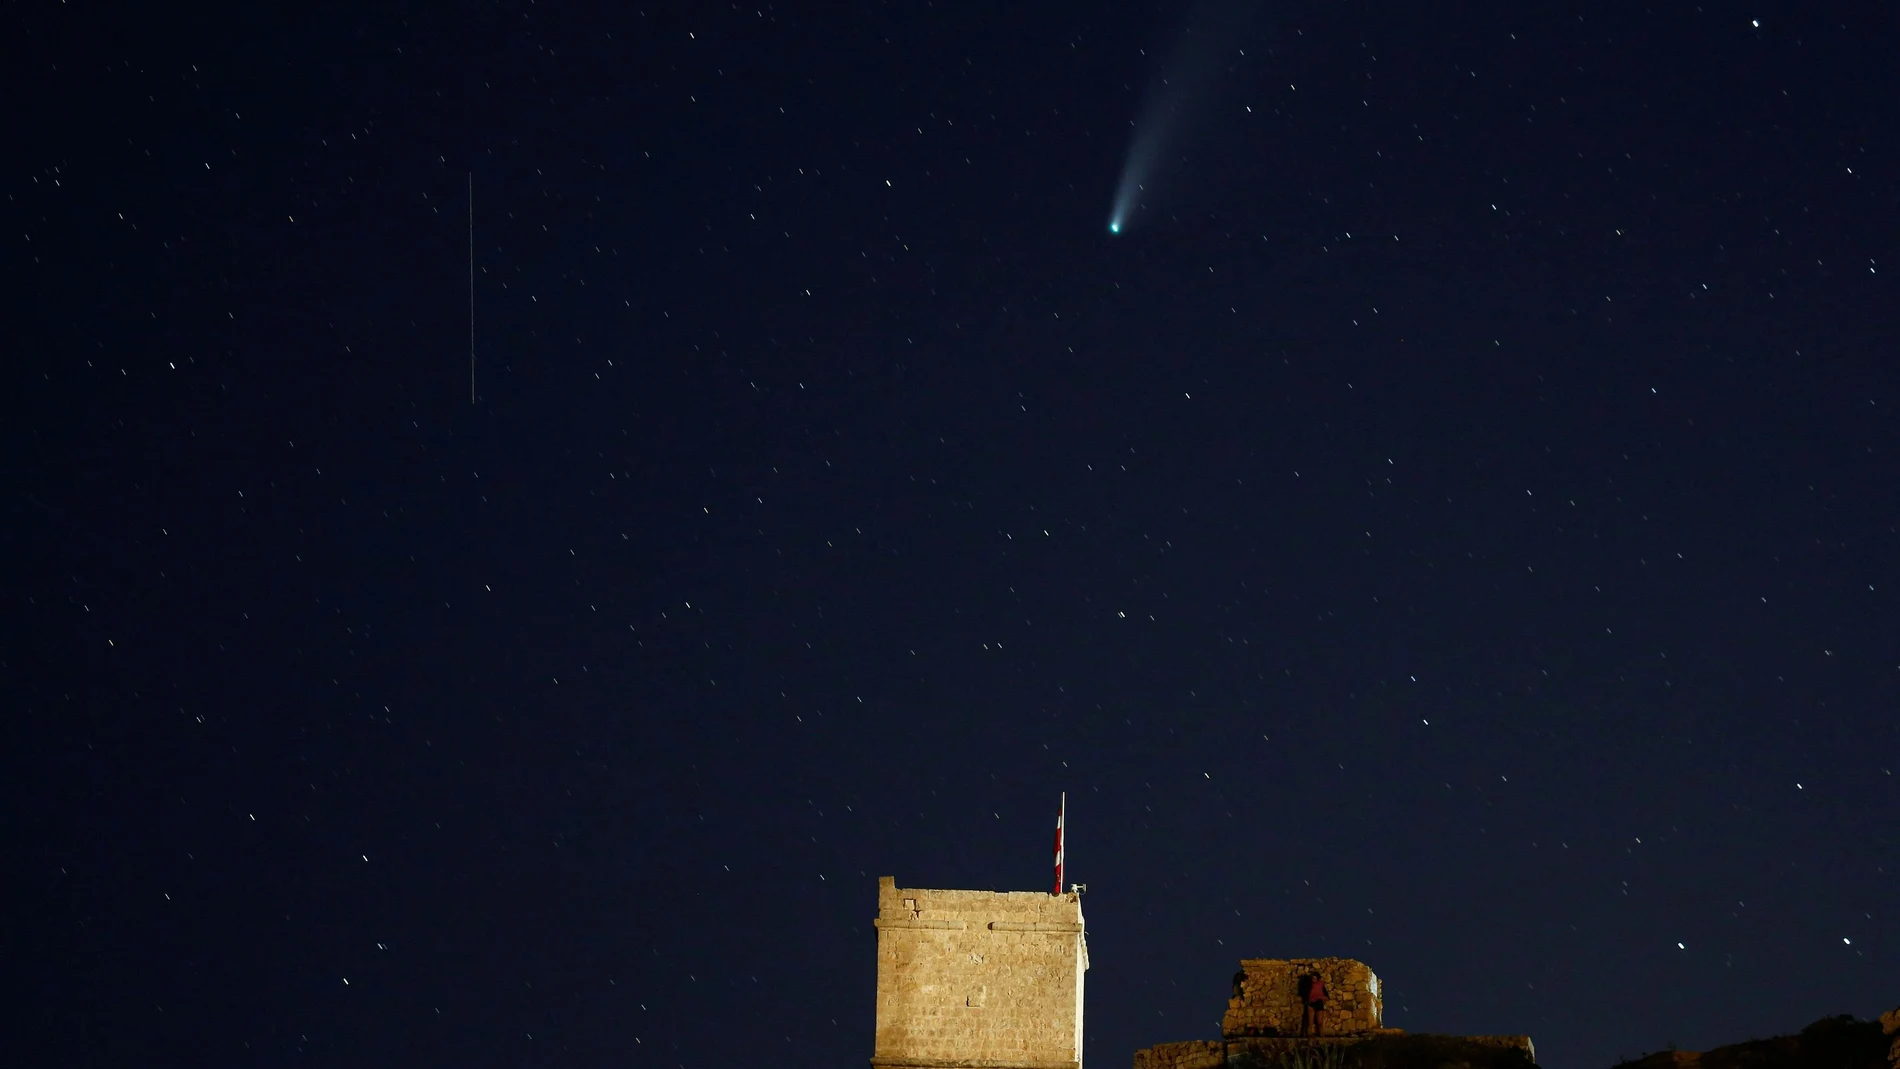 The Comet C/2020 or "Neowise", is seen from Malta